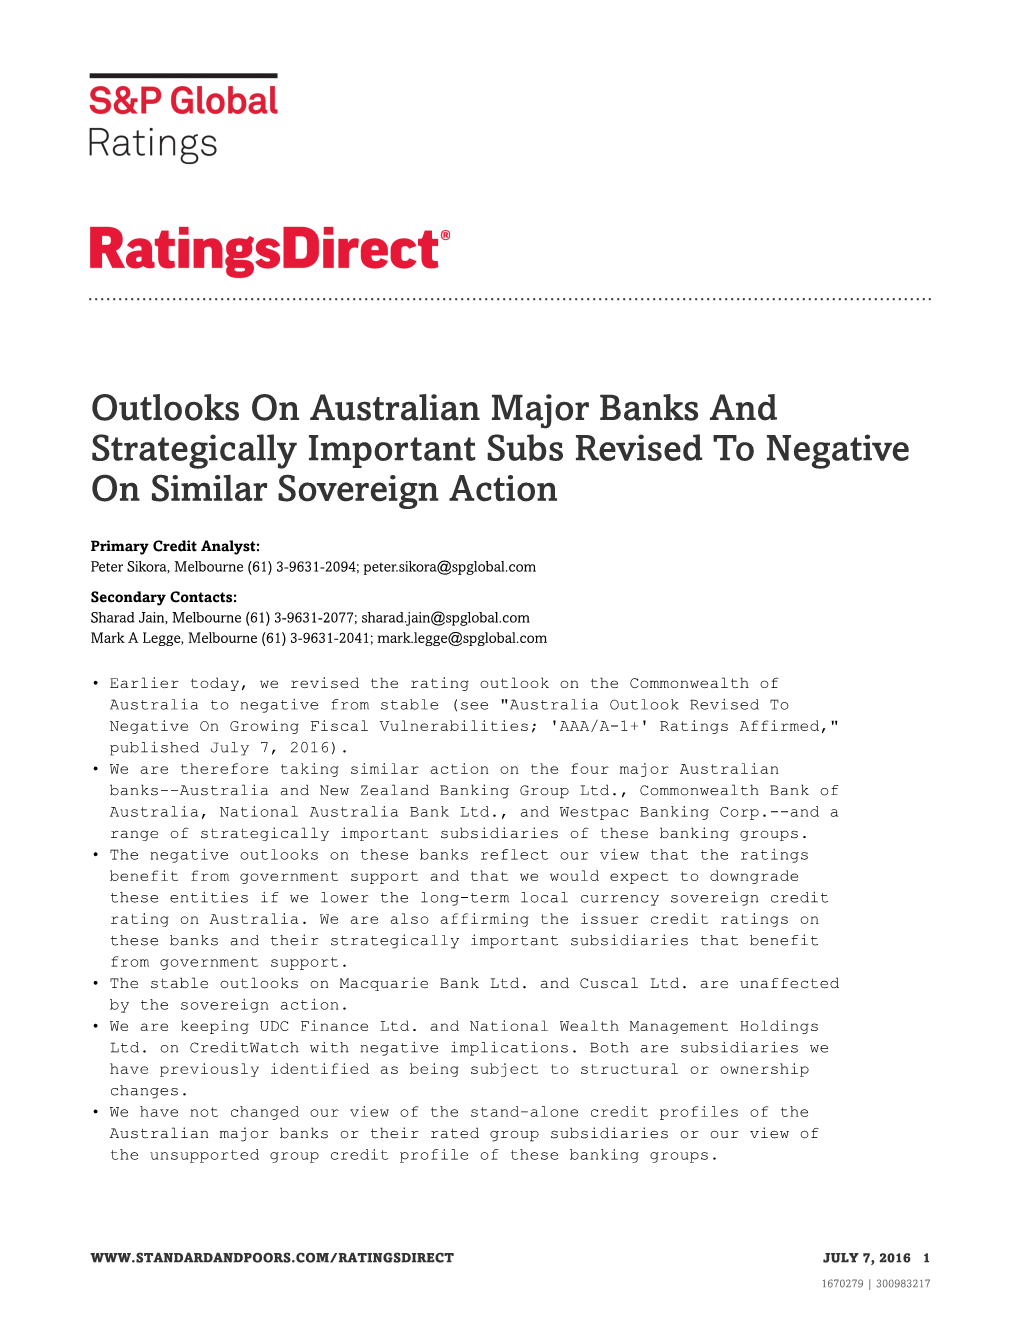 Outlooks on Australian Major Banks and Strategically Important Subs Revised to Negative on Similar Sovereign Action